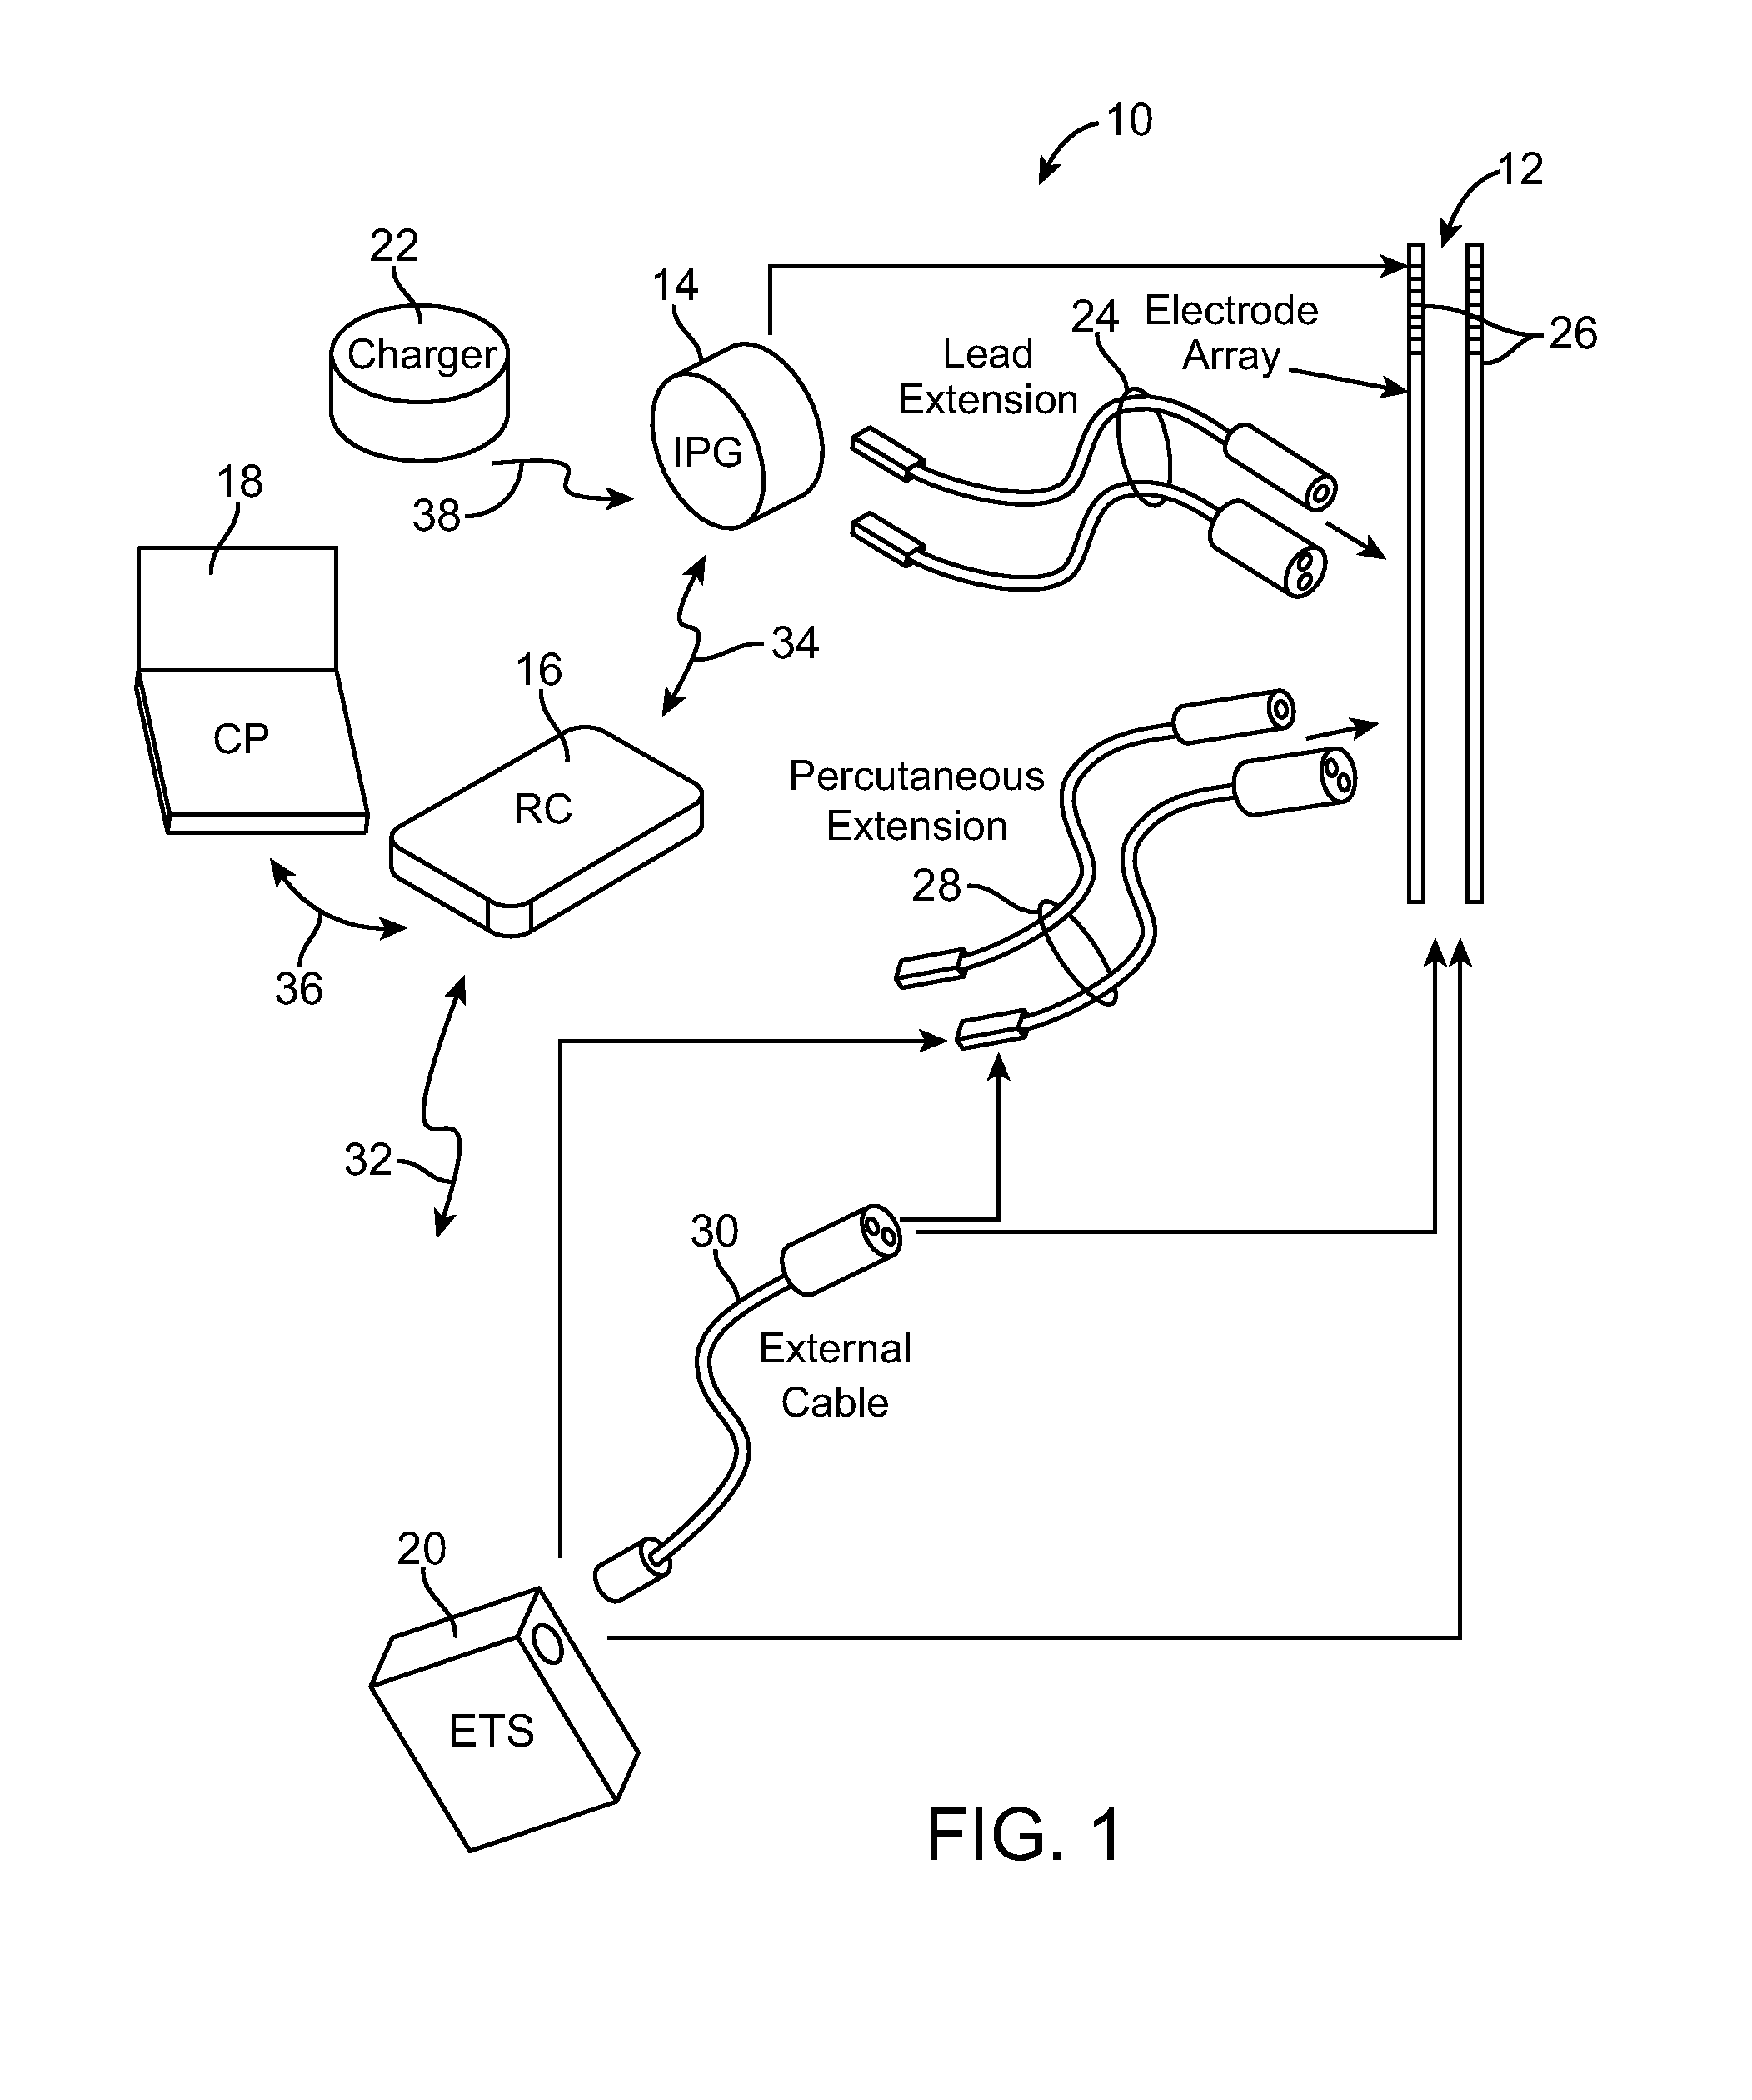 System and method for maintaining a distribution of currents in an electrode array using independent voltage sources